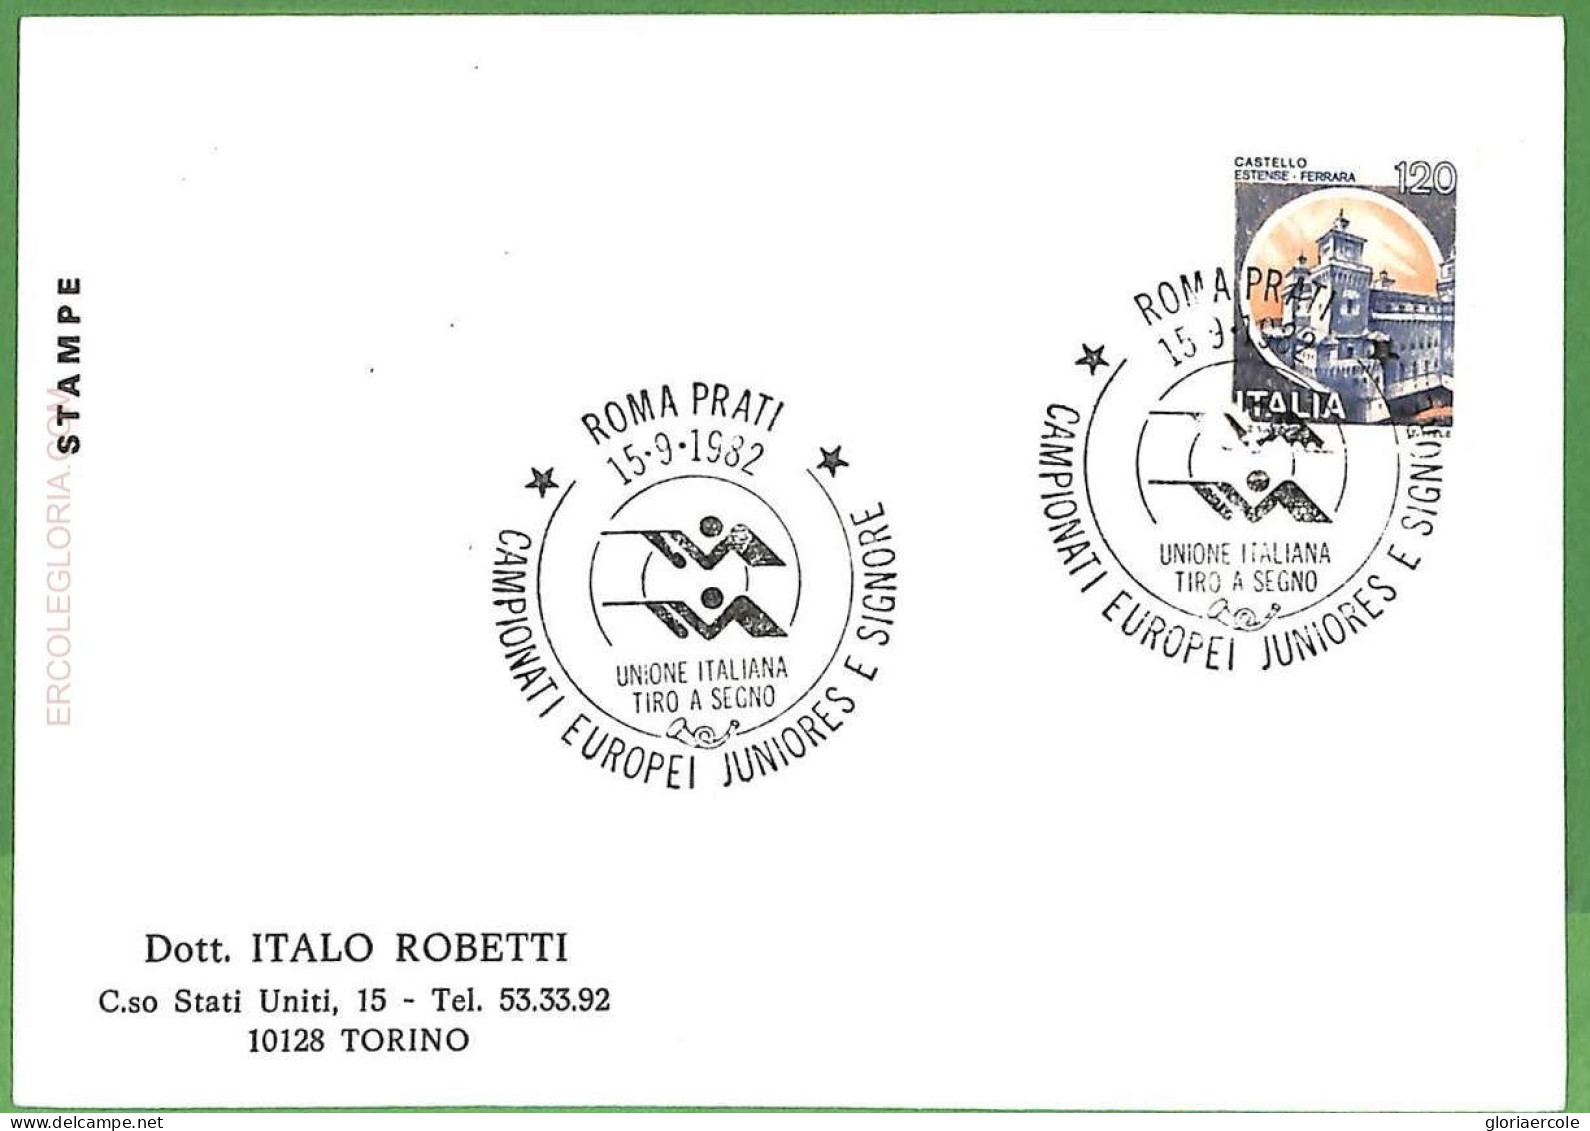 Af3686 - ITALY - POSTAL HISTORY -  EVENT  POSTMARK -  1982 Sport SHOOTING - Shooting (Weapons)